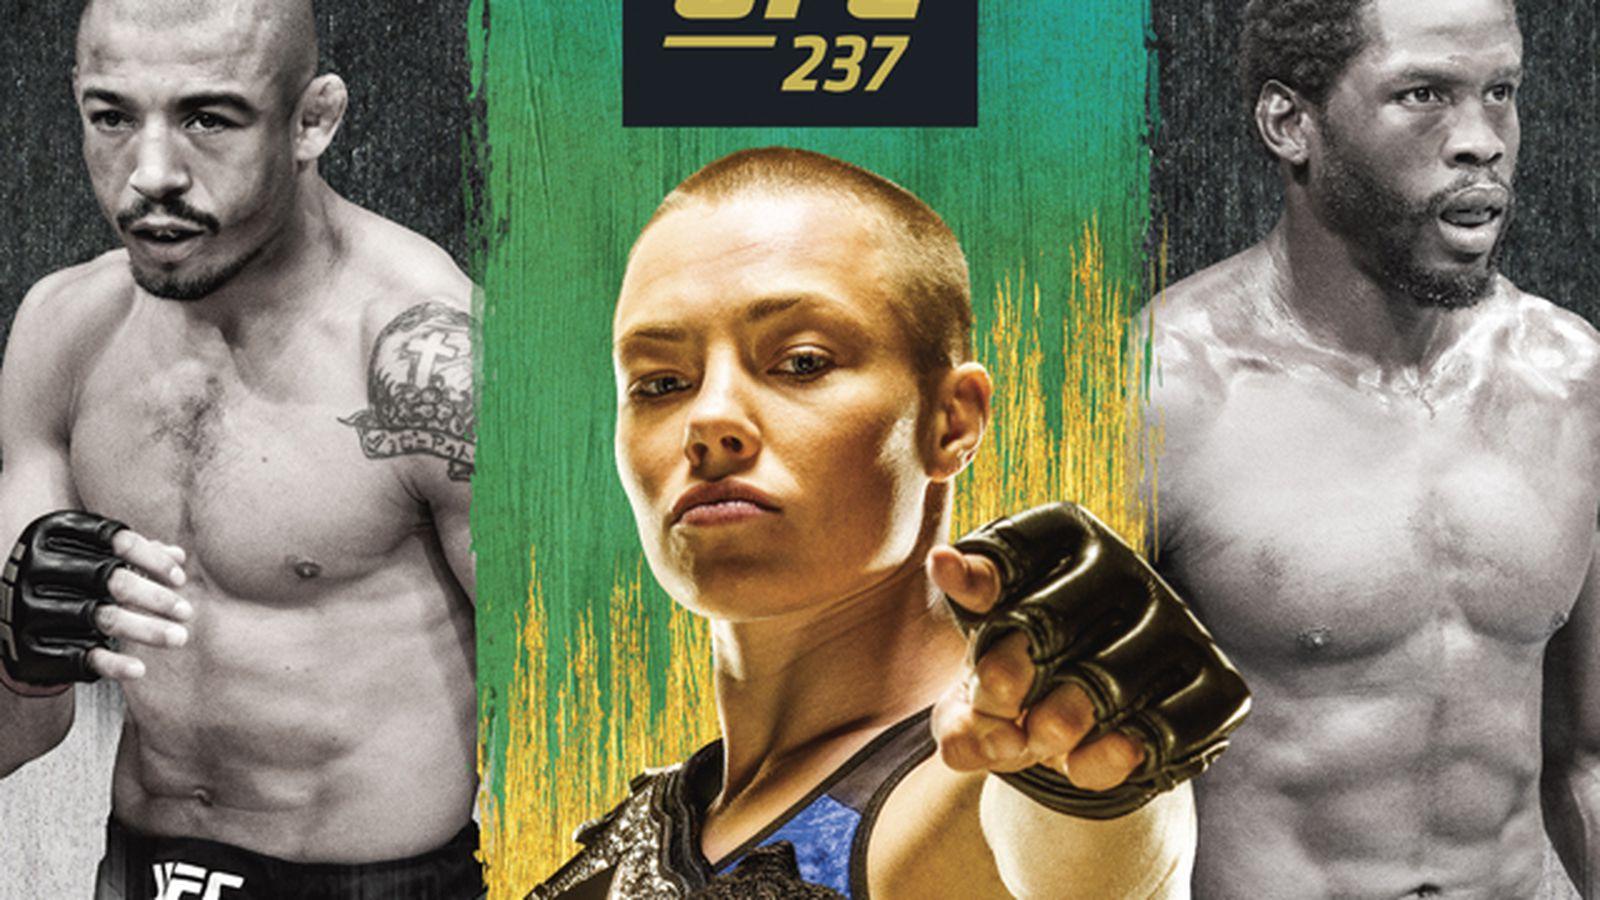 Pic: UFC 237 poster for 'Namajunas vs Andrade' is straight thuggery